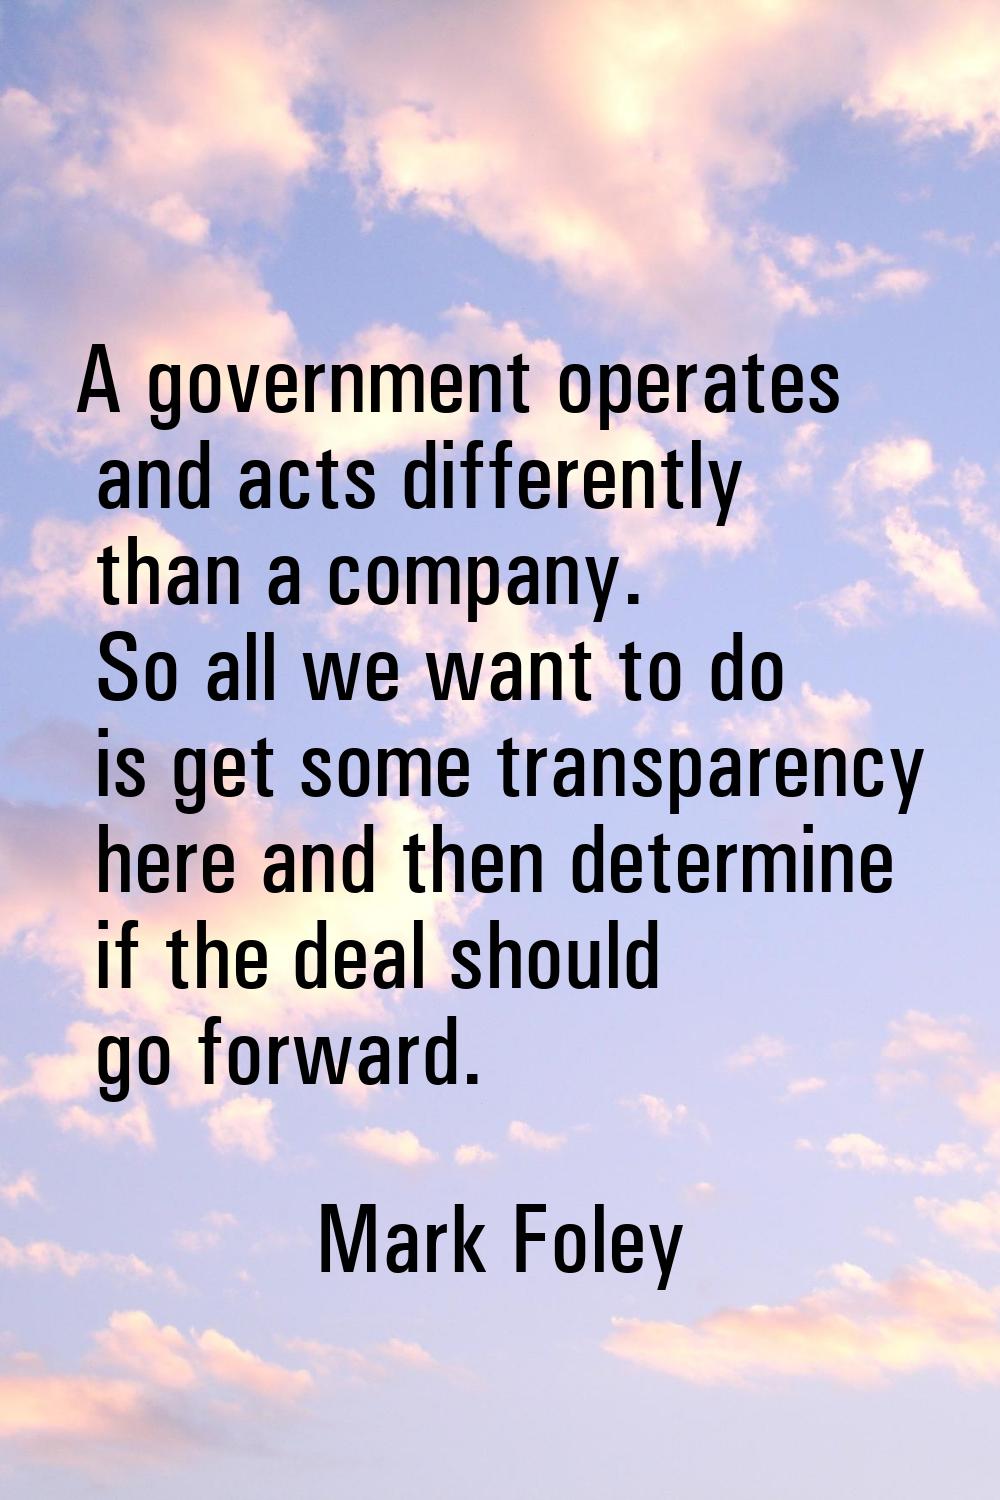 A government operates and acts differently than a company. So all we want to do is get some transpa